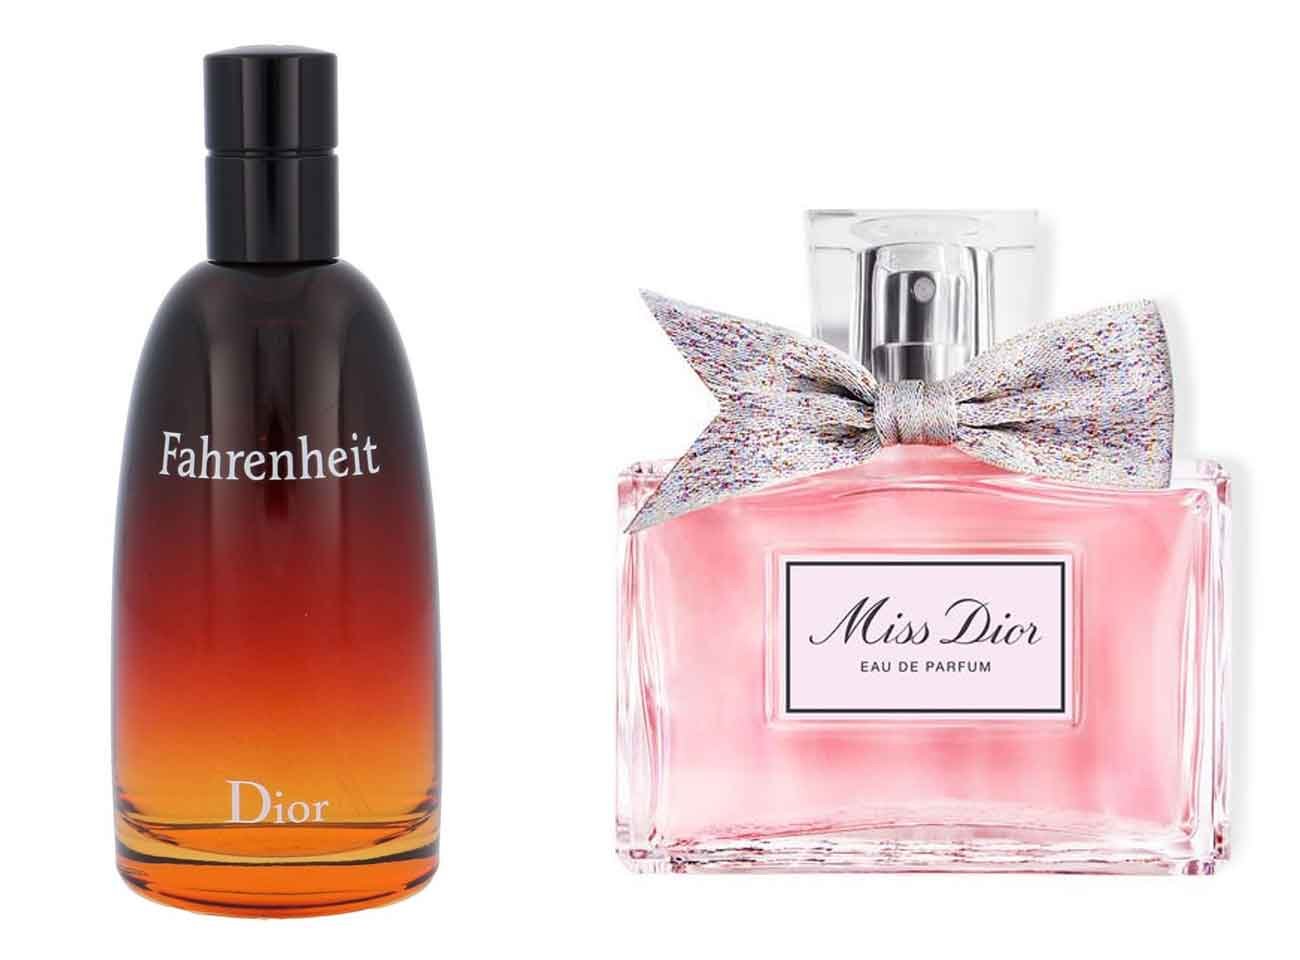 HIS AND HERS DIOR FRAGRANCE SET - Competition Fox